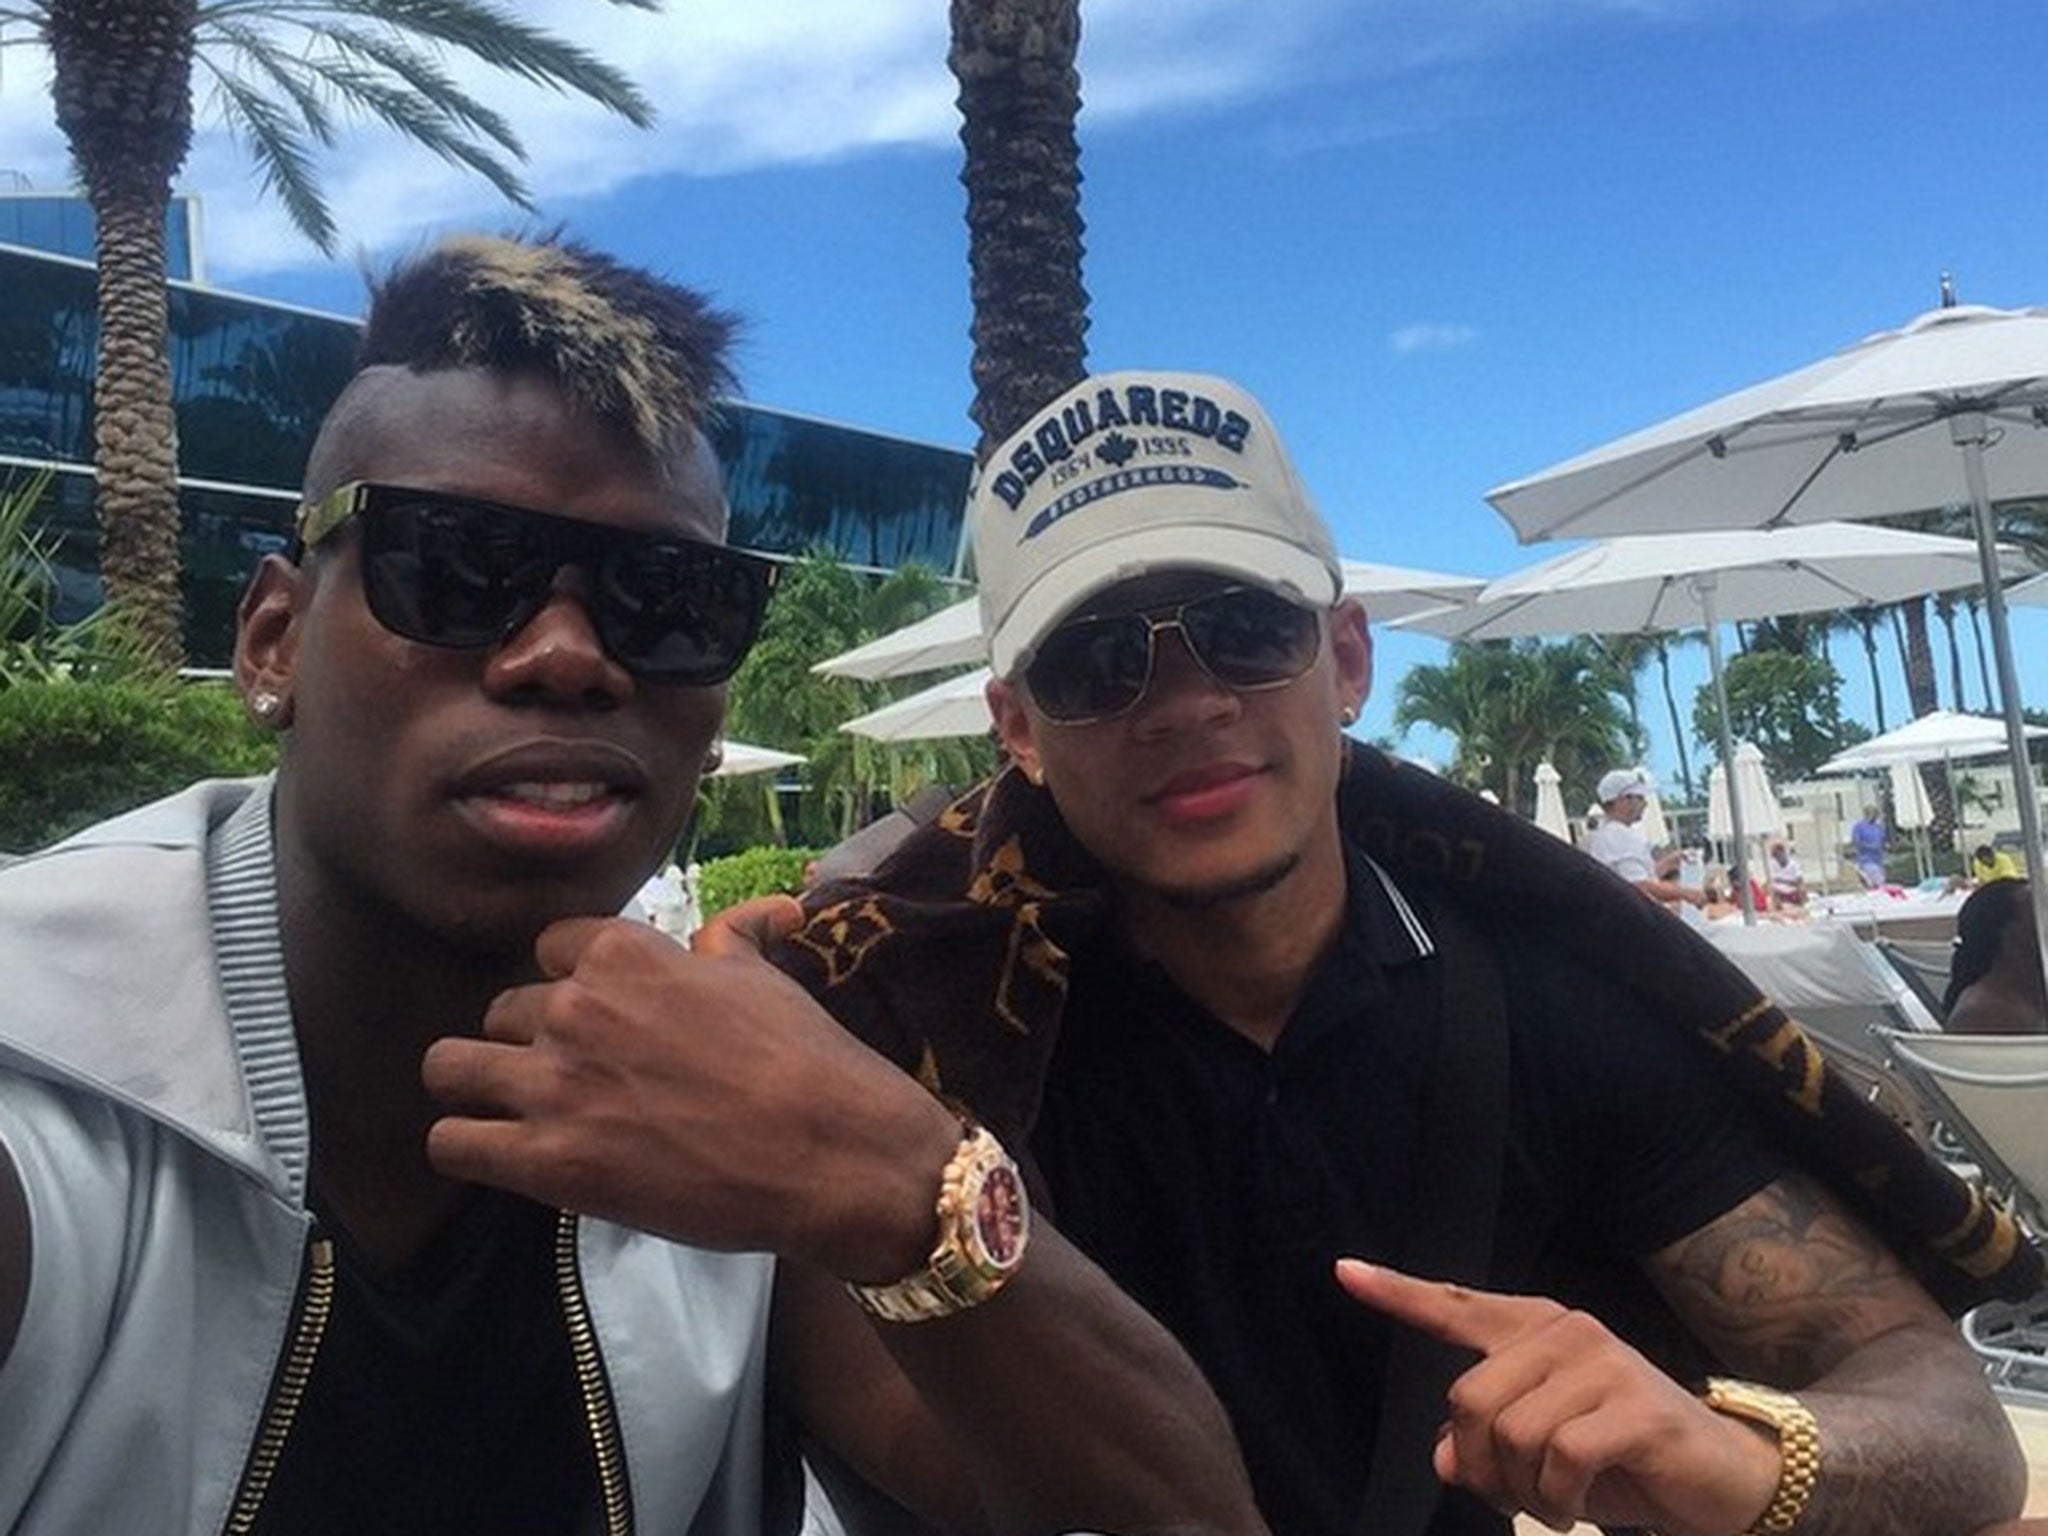 Memphis Depay posted this picture of him on holiday with Paul Pogba this week on Instagram